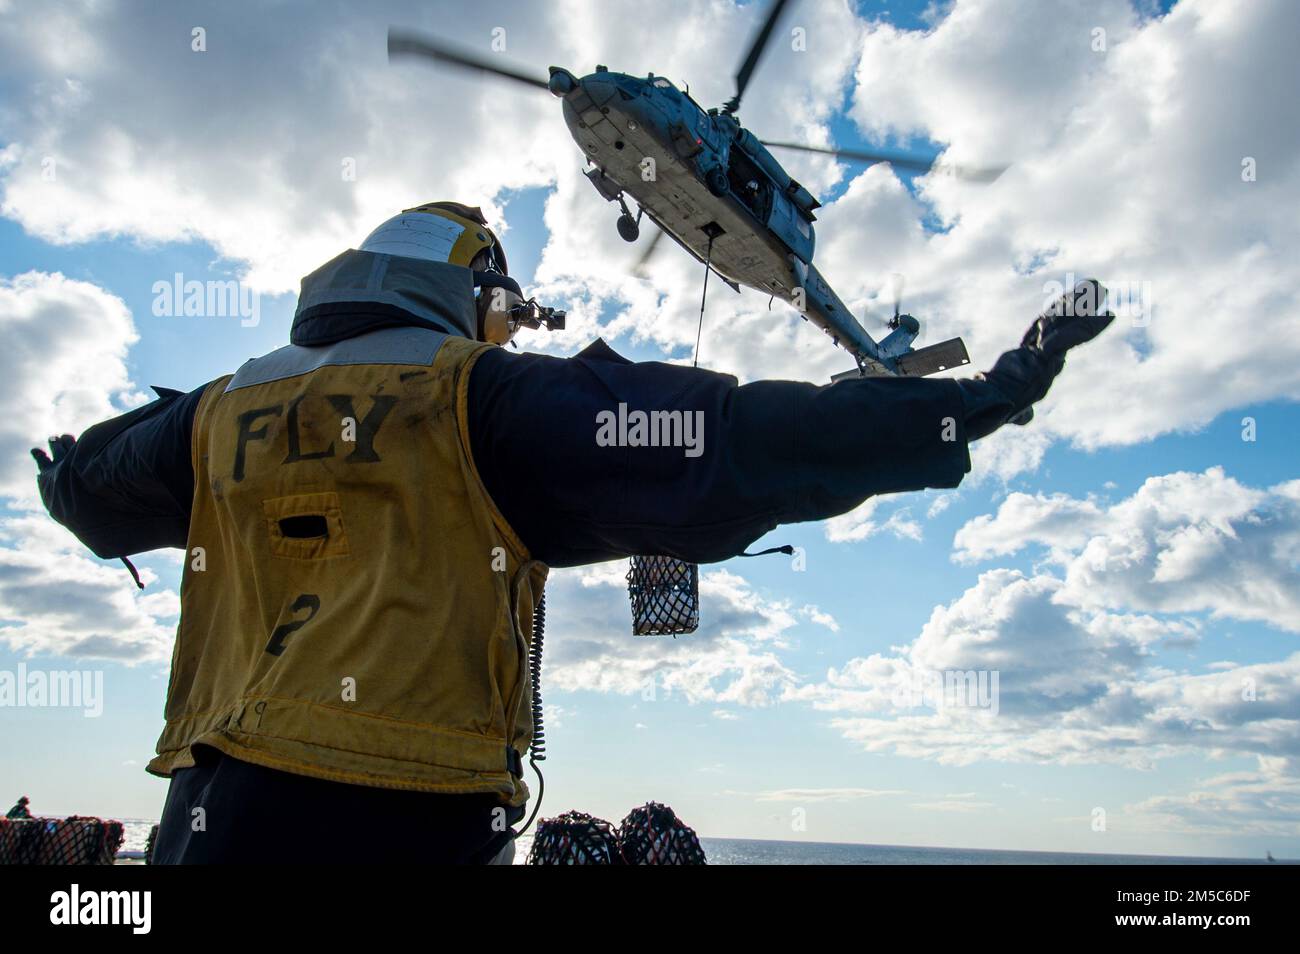 220228-N-PG226-1221 ADRIATIC SEA (Feb 28, 2022) Aviation Boatswain's Mate (Handling) 2nd Class Dagnan Vissoh, from Abidjan, Ivory Coast, directs the pilot of an MH-60S Sea Hawk helicopter, attached to the 'Dragonslayers' of Helicopter Sea Combat Squadron (HSC) 11, on the flight deck of the Nimitz-class aircraft carrier USS Harry S. Truman (CVN 75) during a replenishment-at-sea, Feb 28, 2022. The Harry S. Truman Carrier Strike Group is on a scheduled deployment in the U.S. Sixth Fleet area of operations in support of U.S., allied and partner interests in Europe and Africa. Stock Photo